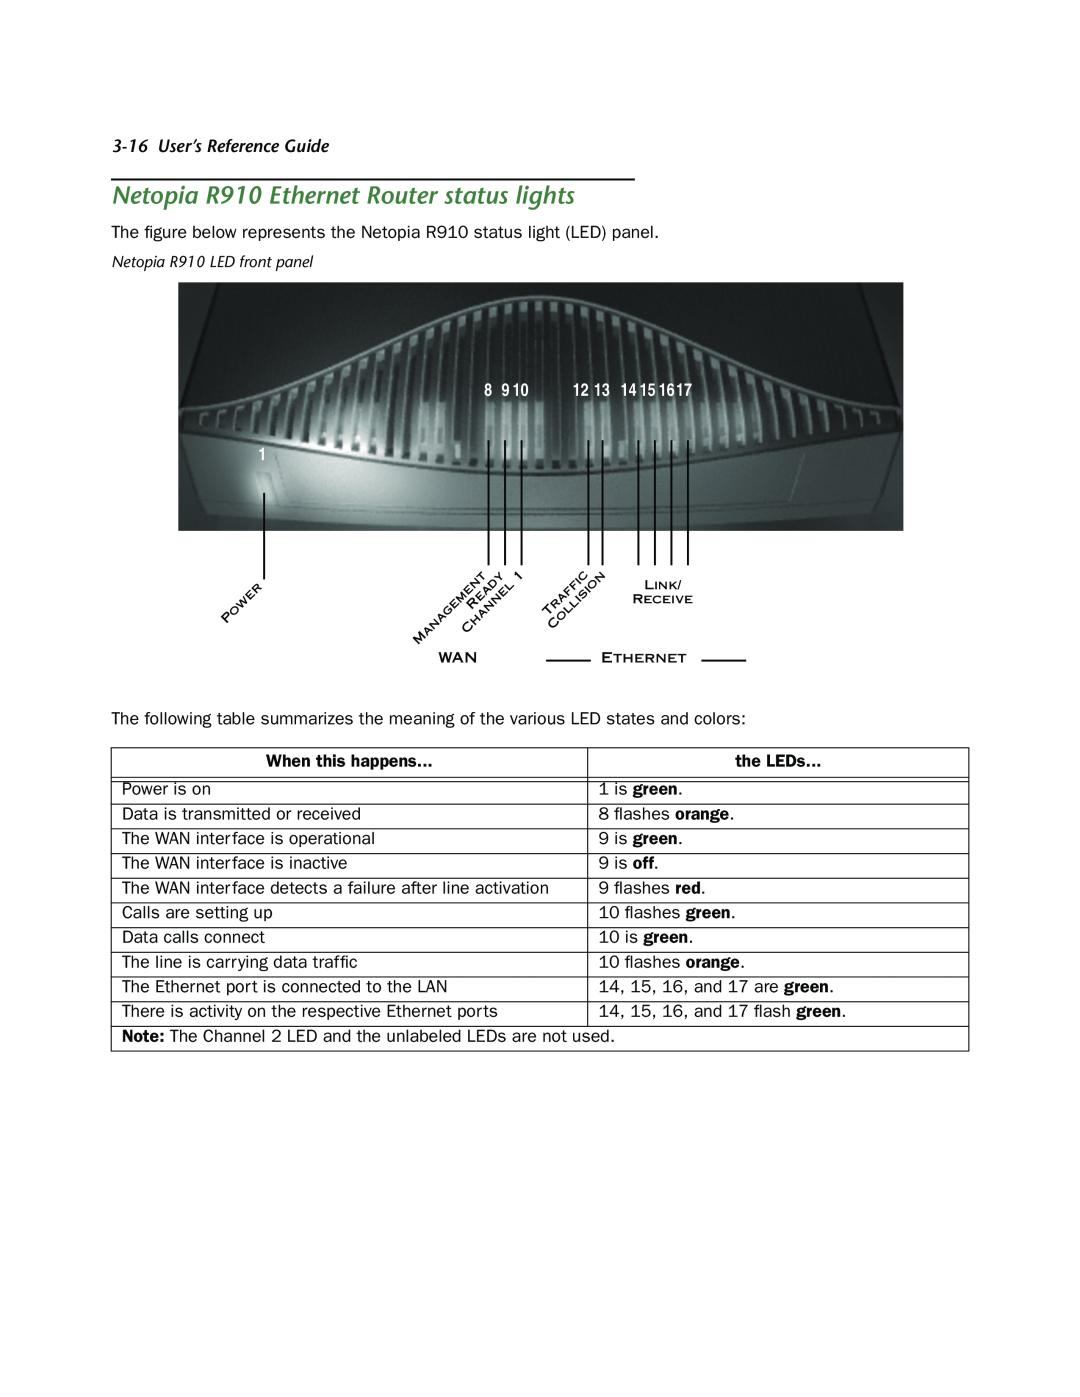 Netopia manual Netopia R910 Ethernet Router status lights, User’s Reference Guide, 8 9 10 12 13 14 15 16 